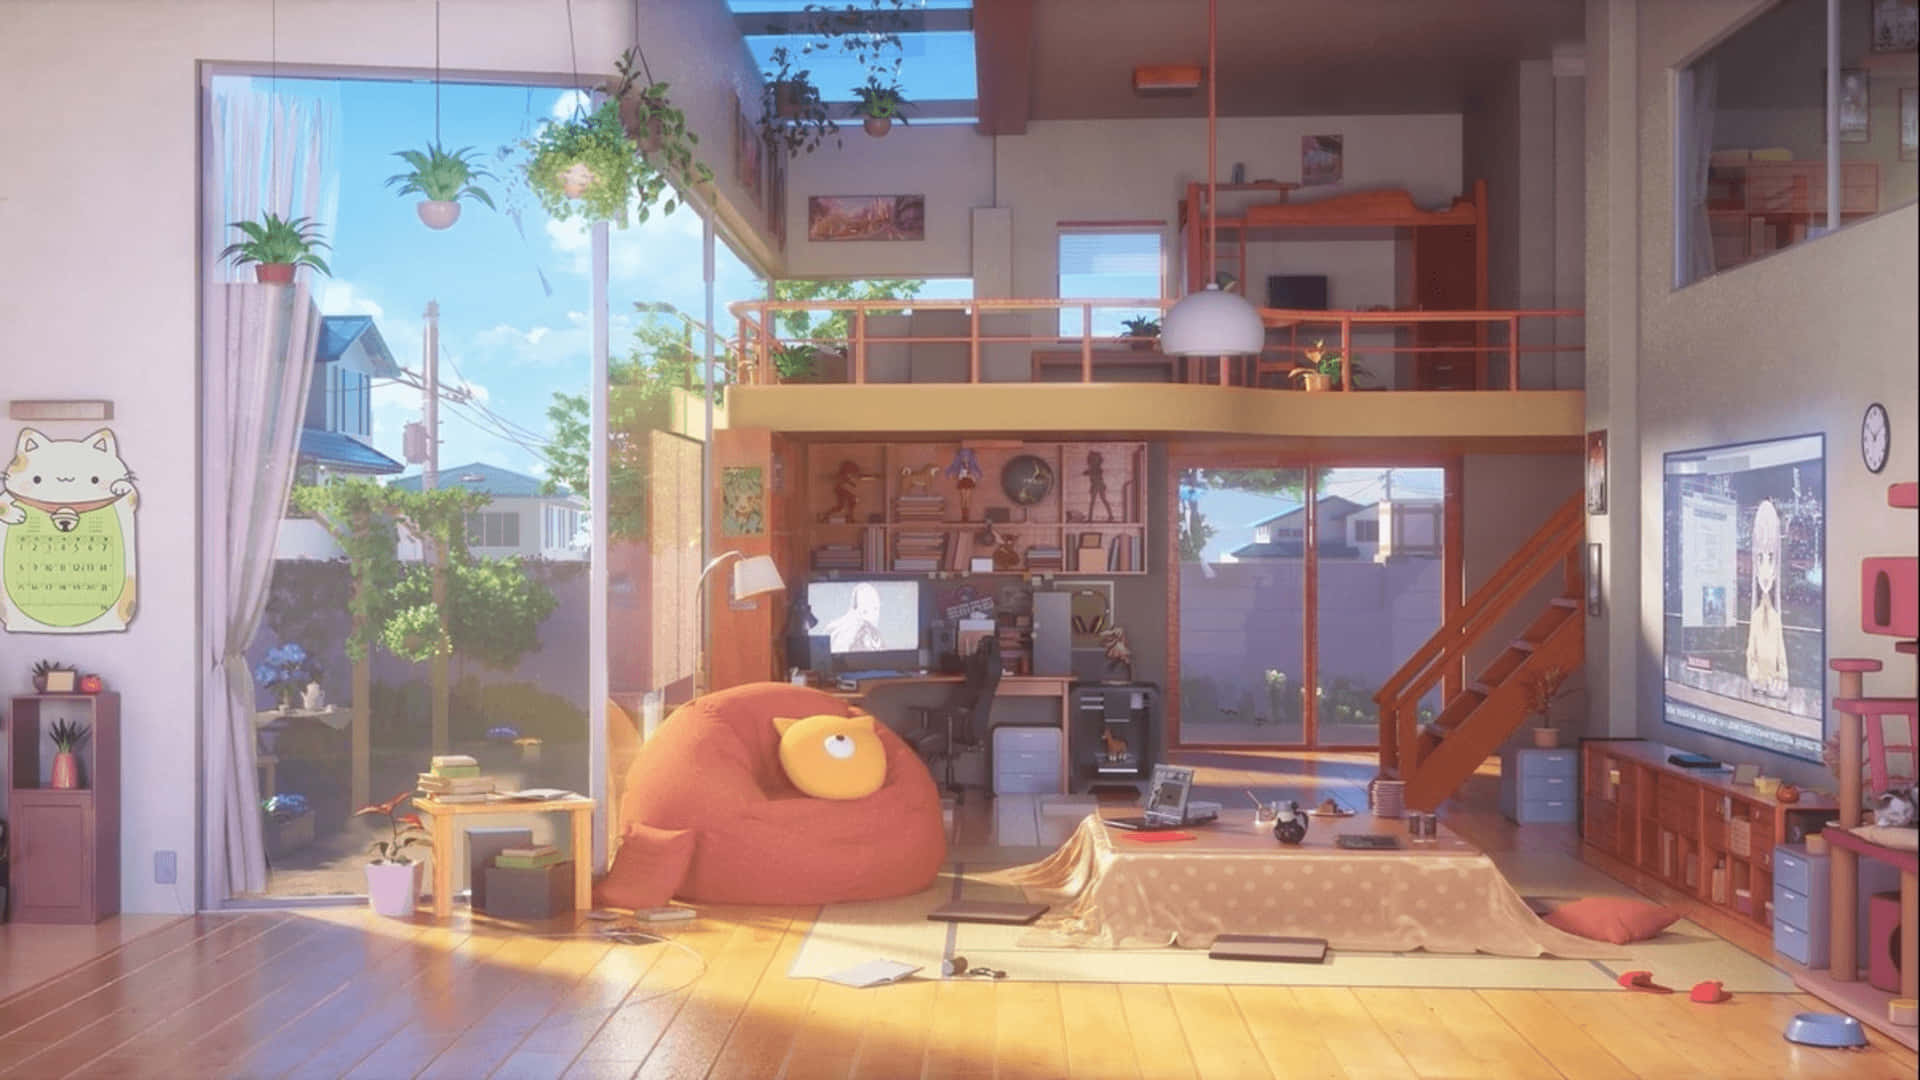 Enjoy Relaxing Anime Anywhere with this Cozy Anime Wallpaper Wallpaper